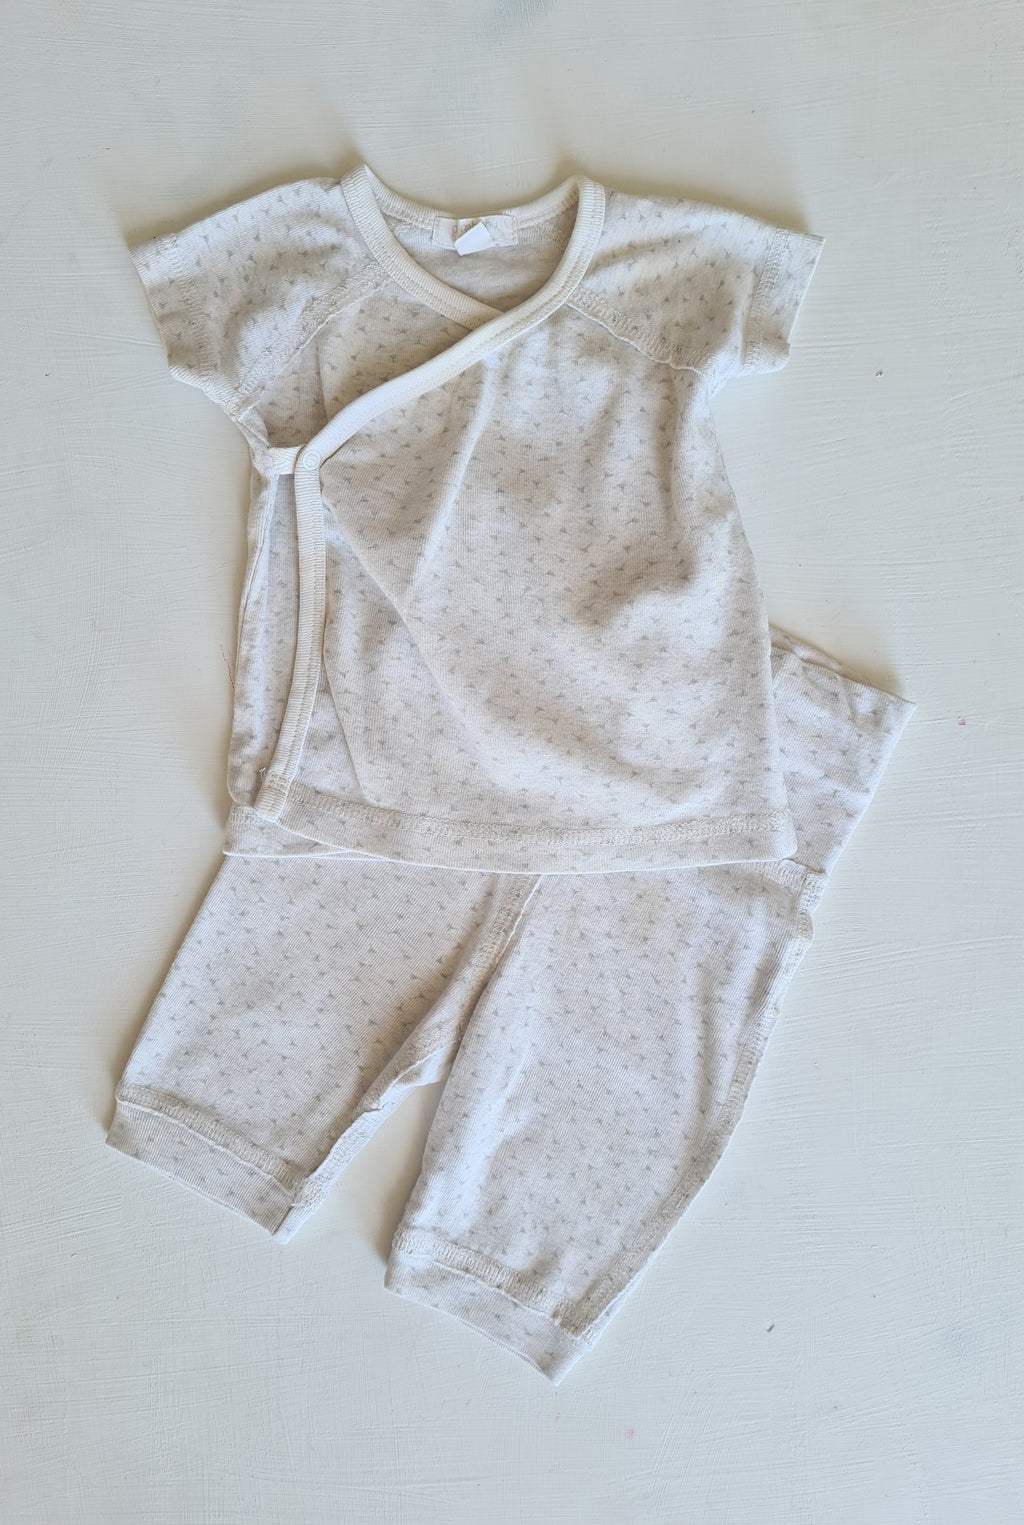 THRIFT Purebaby Two Piece Casual Set- Size 0-3 months